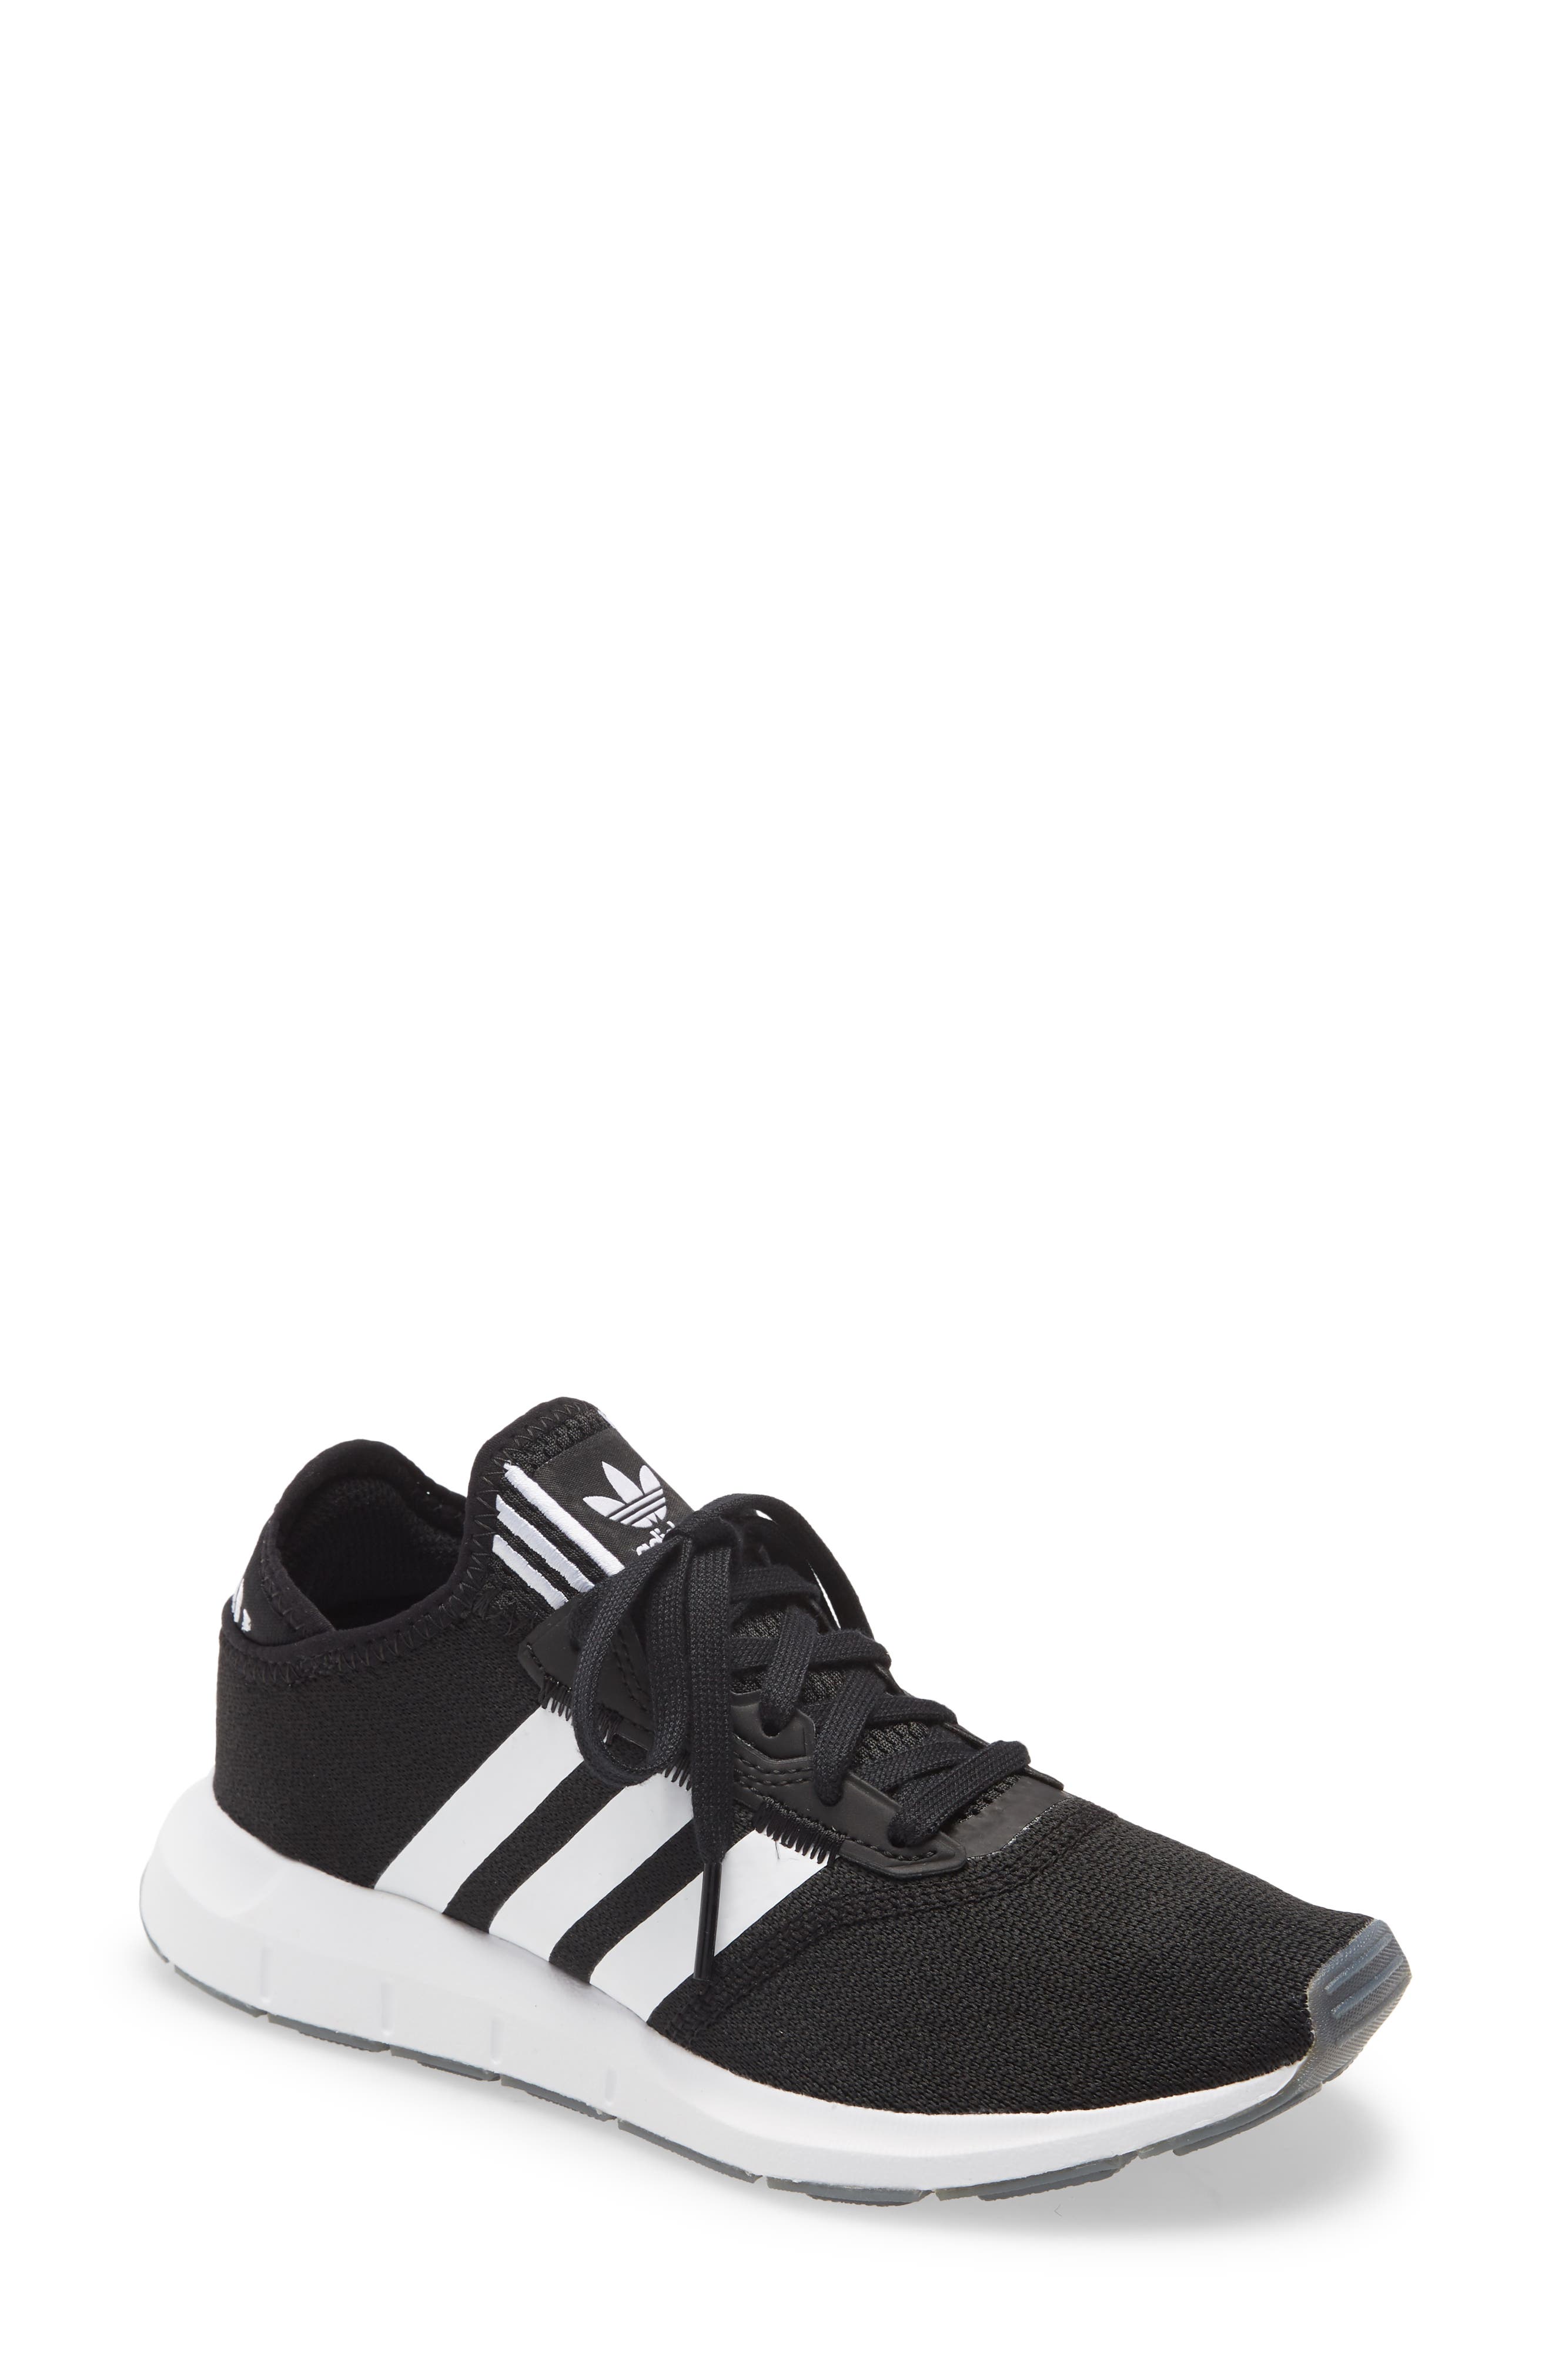 adidas casual womens shoes